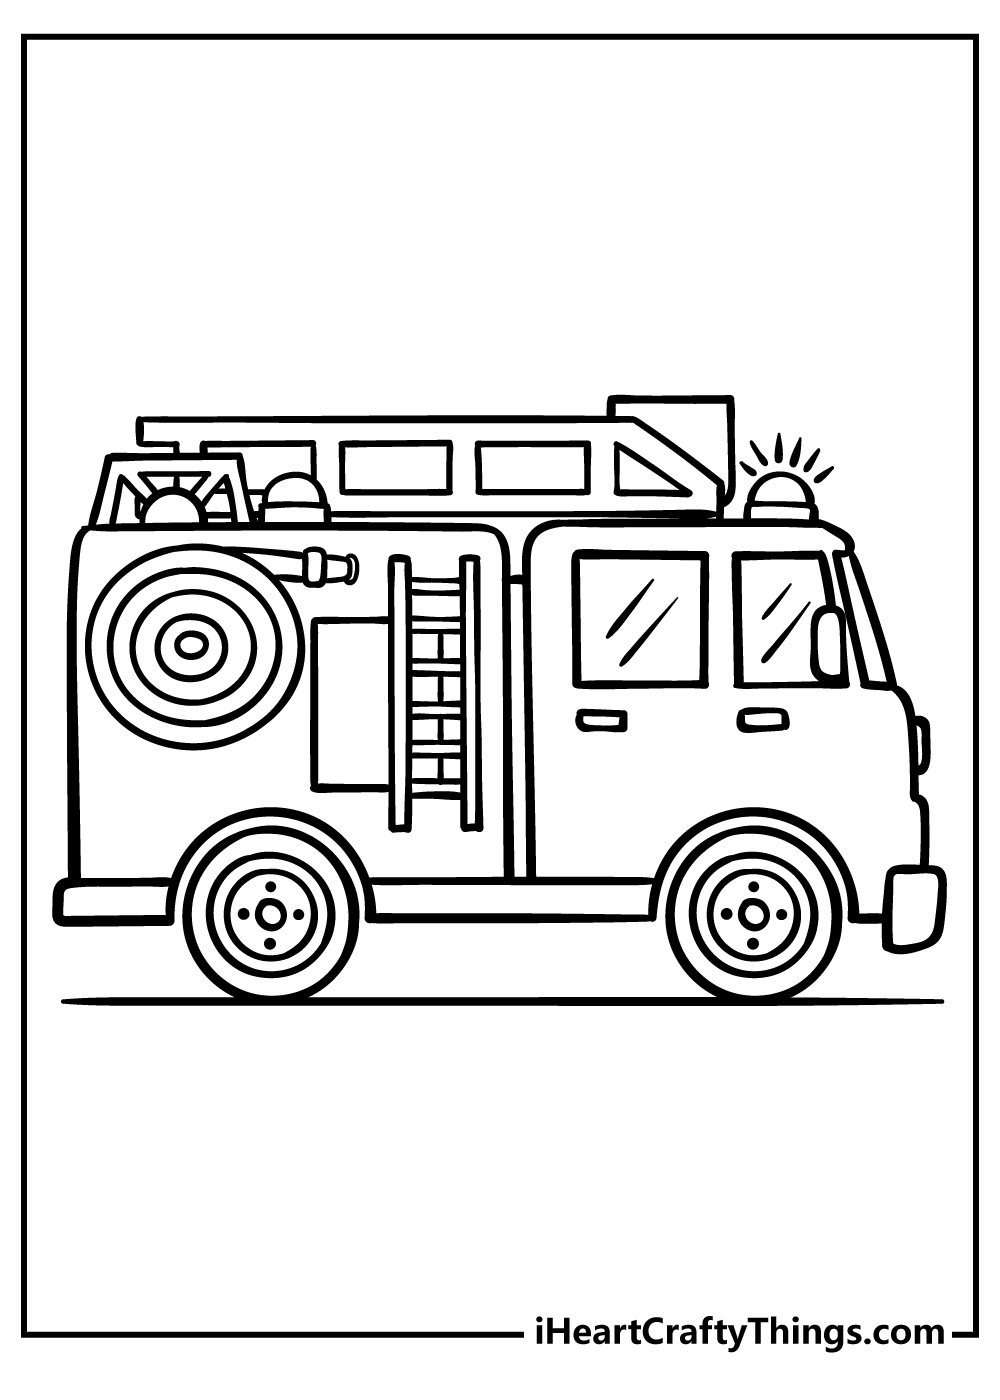 Fire Truck Coloring Pages for adults free printable